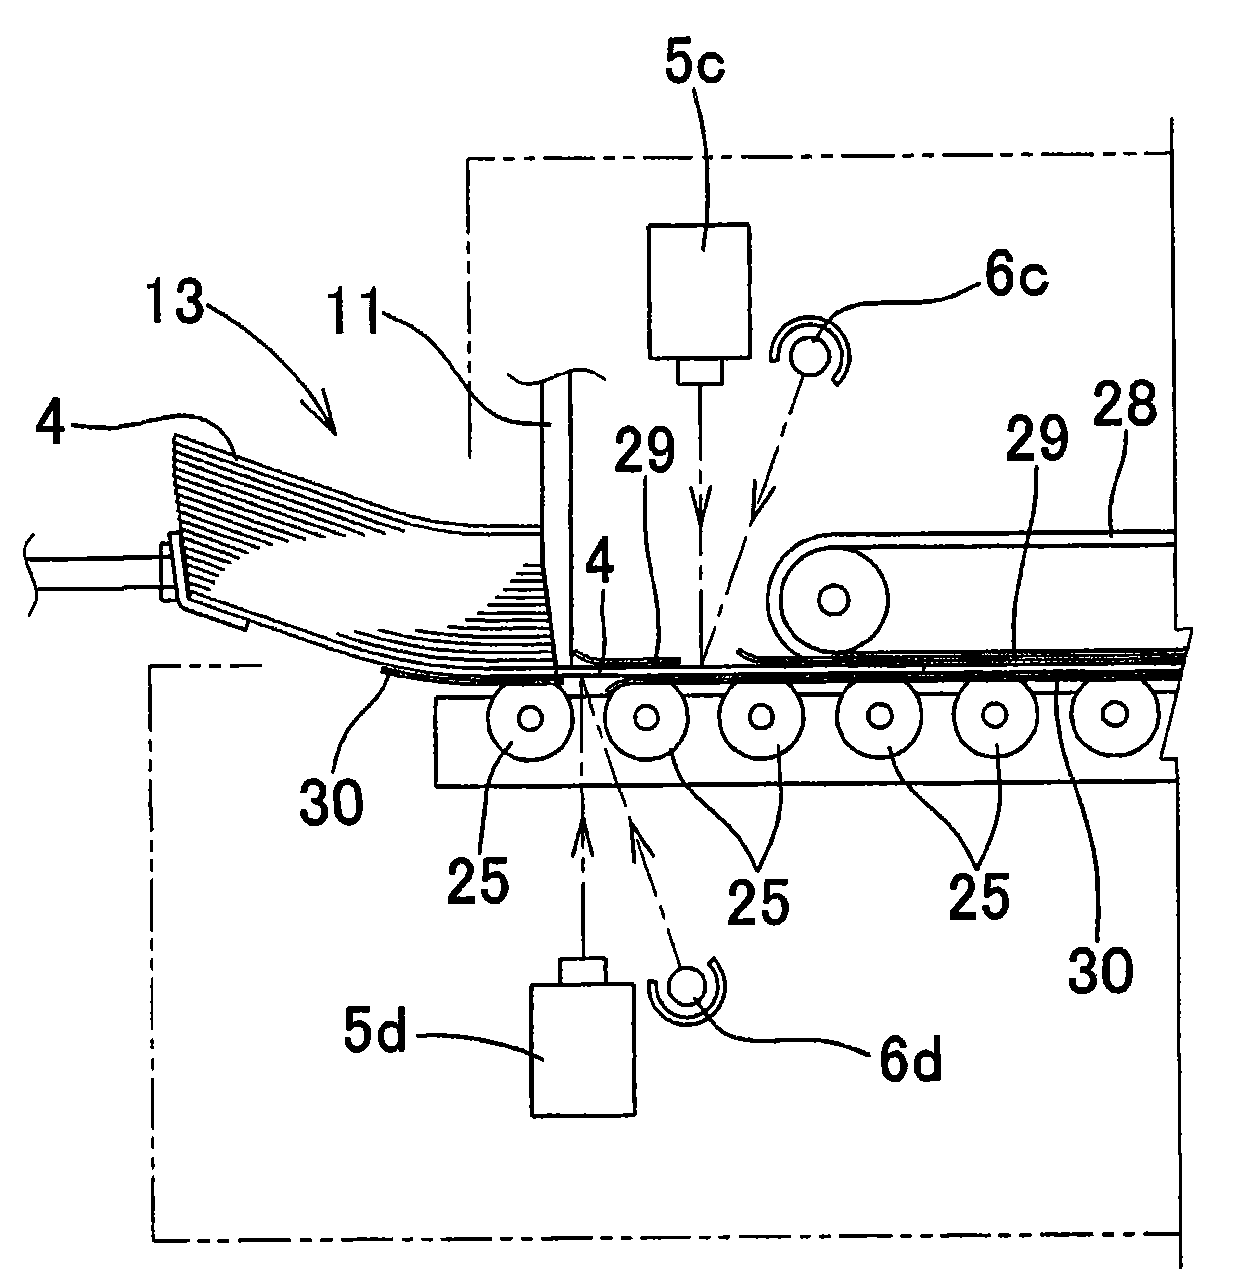 Box-manufacturing device